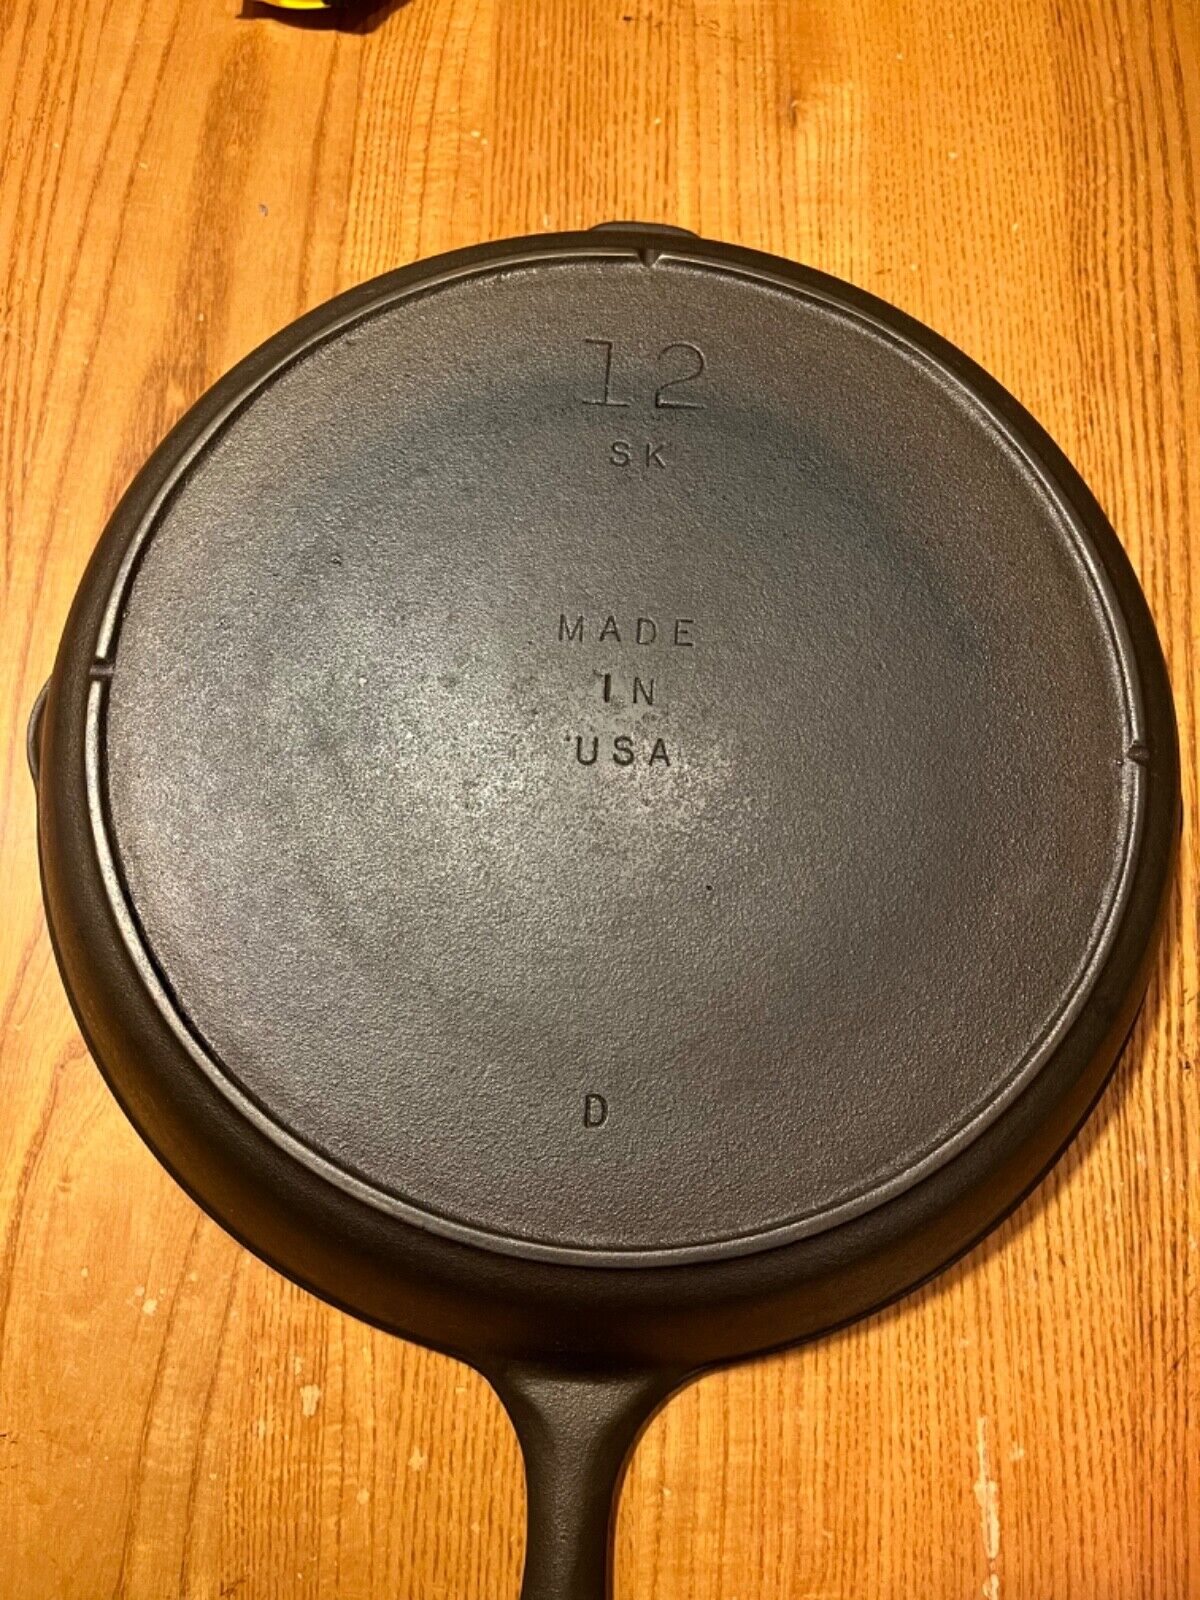 No. 12 Cast Iron Skillet (In-Store Pickup Only) — SCOUT of marion